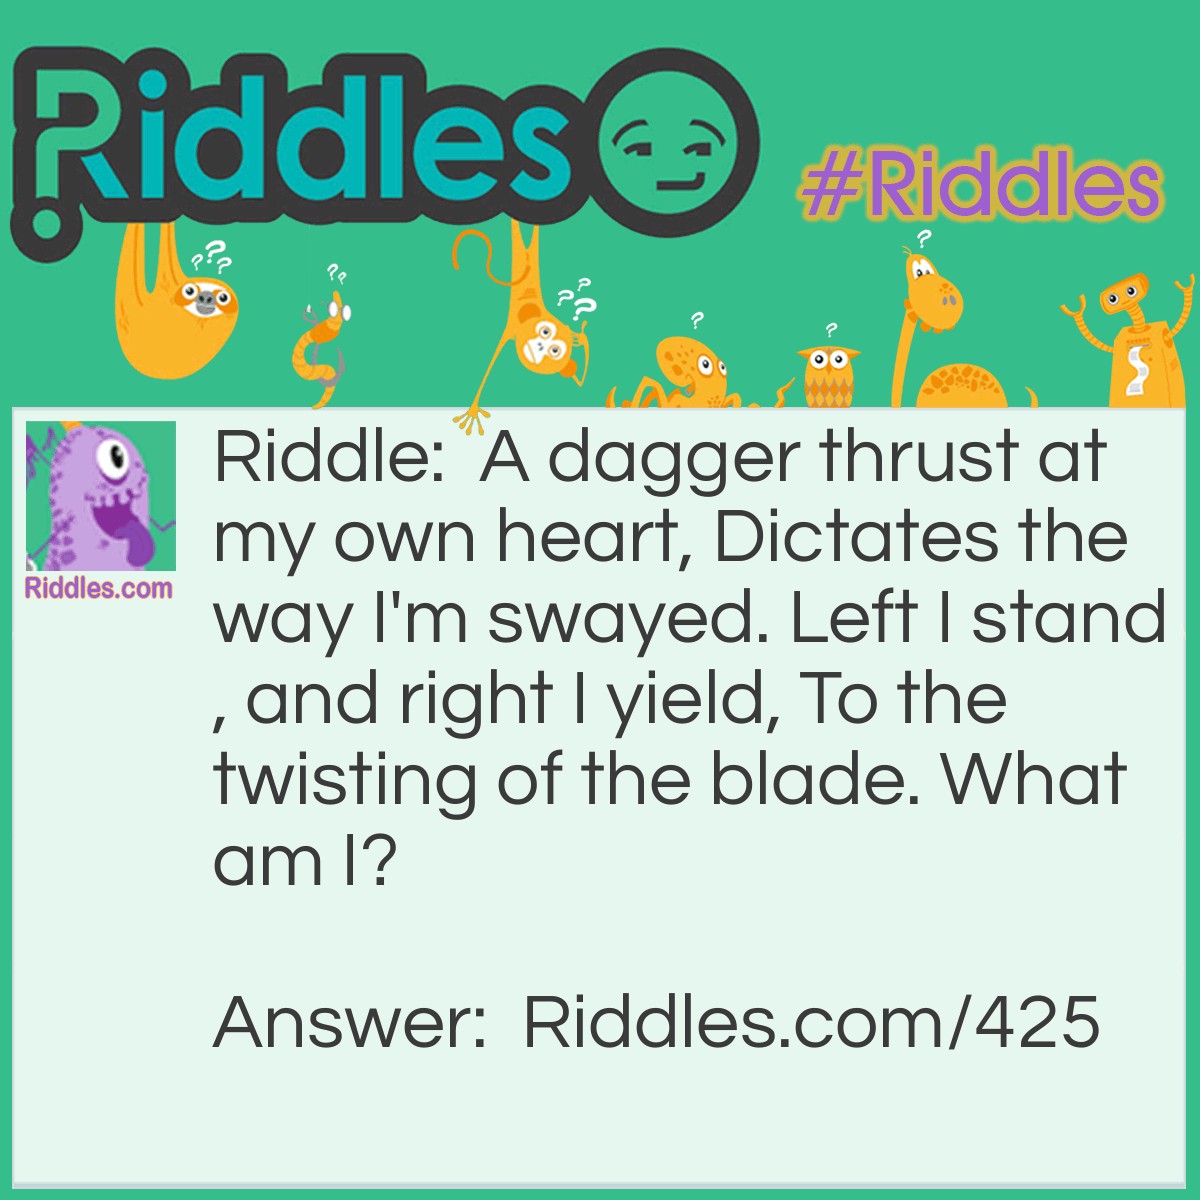 Riddle: A dagger thrust at my own heart, Dictates the way I'm swayed. Left I stand, and right I yield, To the twisting of the blade. What am I? Answer: A Lock.